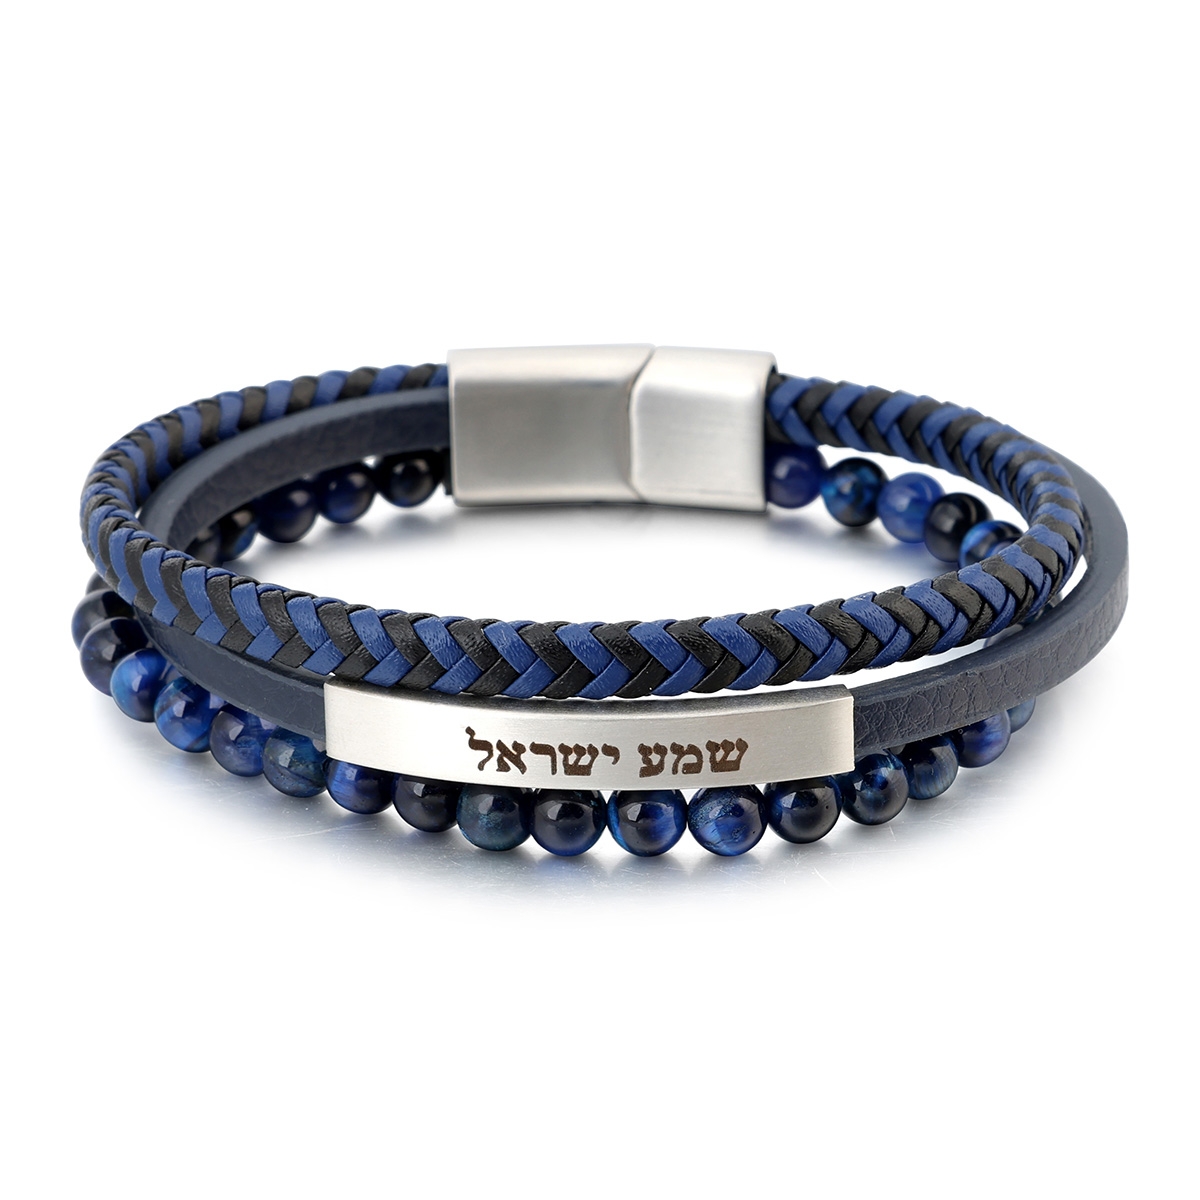 Men's Shema Yisrael 3-Band Beaded Leather Bracelet with Magnetic Clasp - Blue and Black - 1